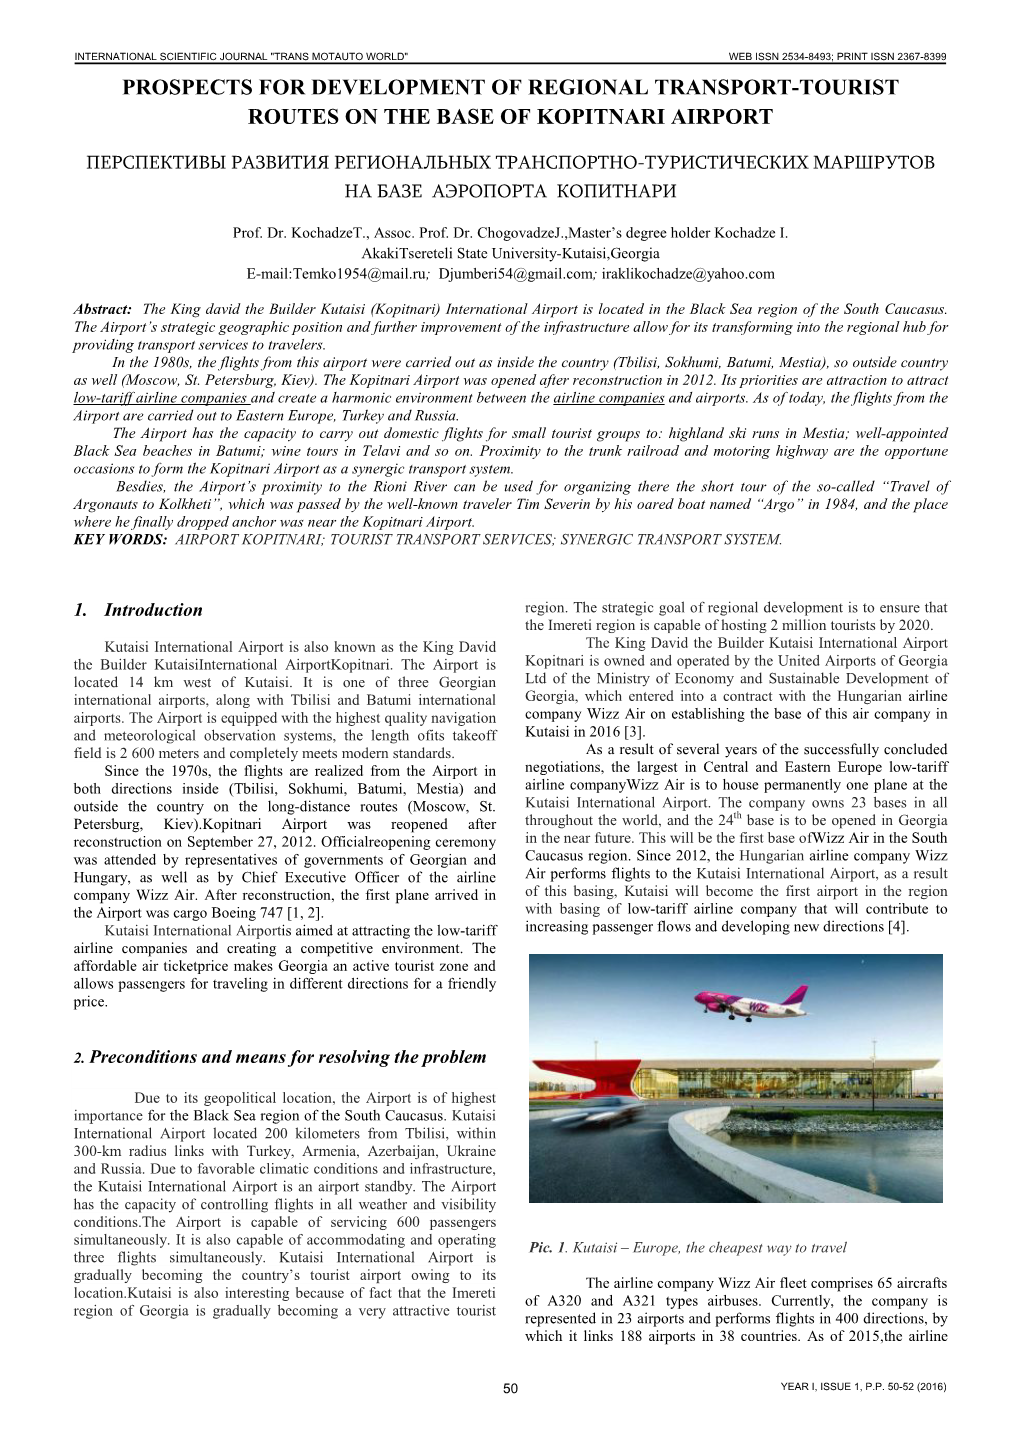 Prospects for Development of Regional Transport-Tourist Routes on the Base of Kopitnari Airport